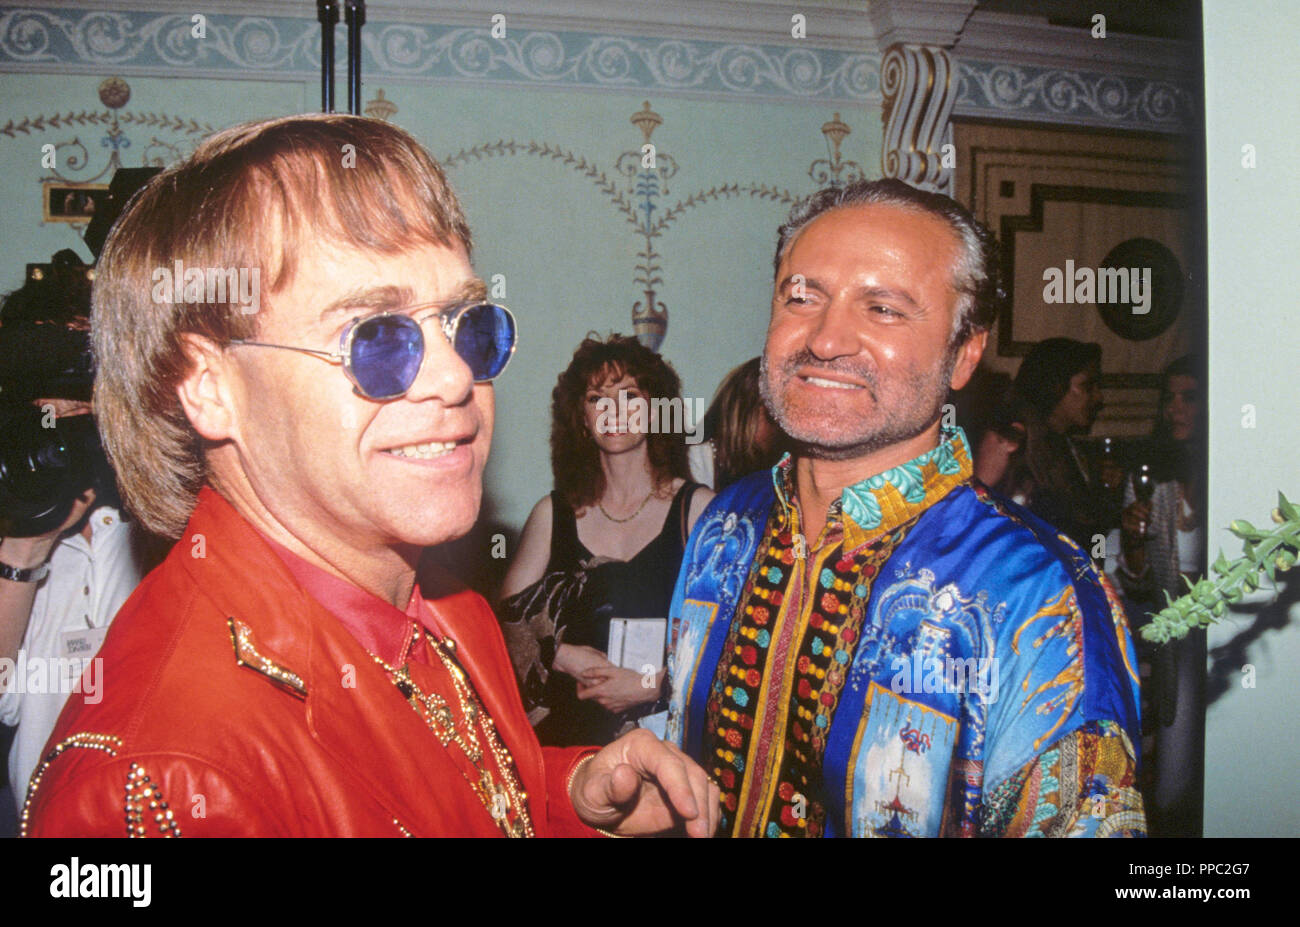 Gianni Versace with Elton John at Versace's party © GRANATAIMAGES